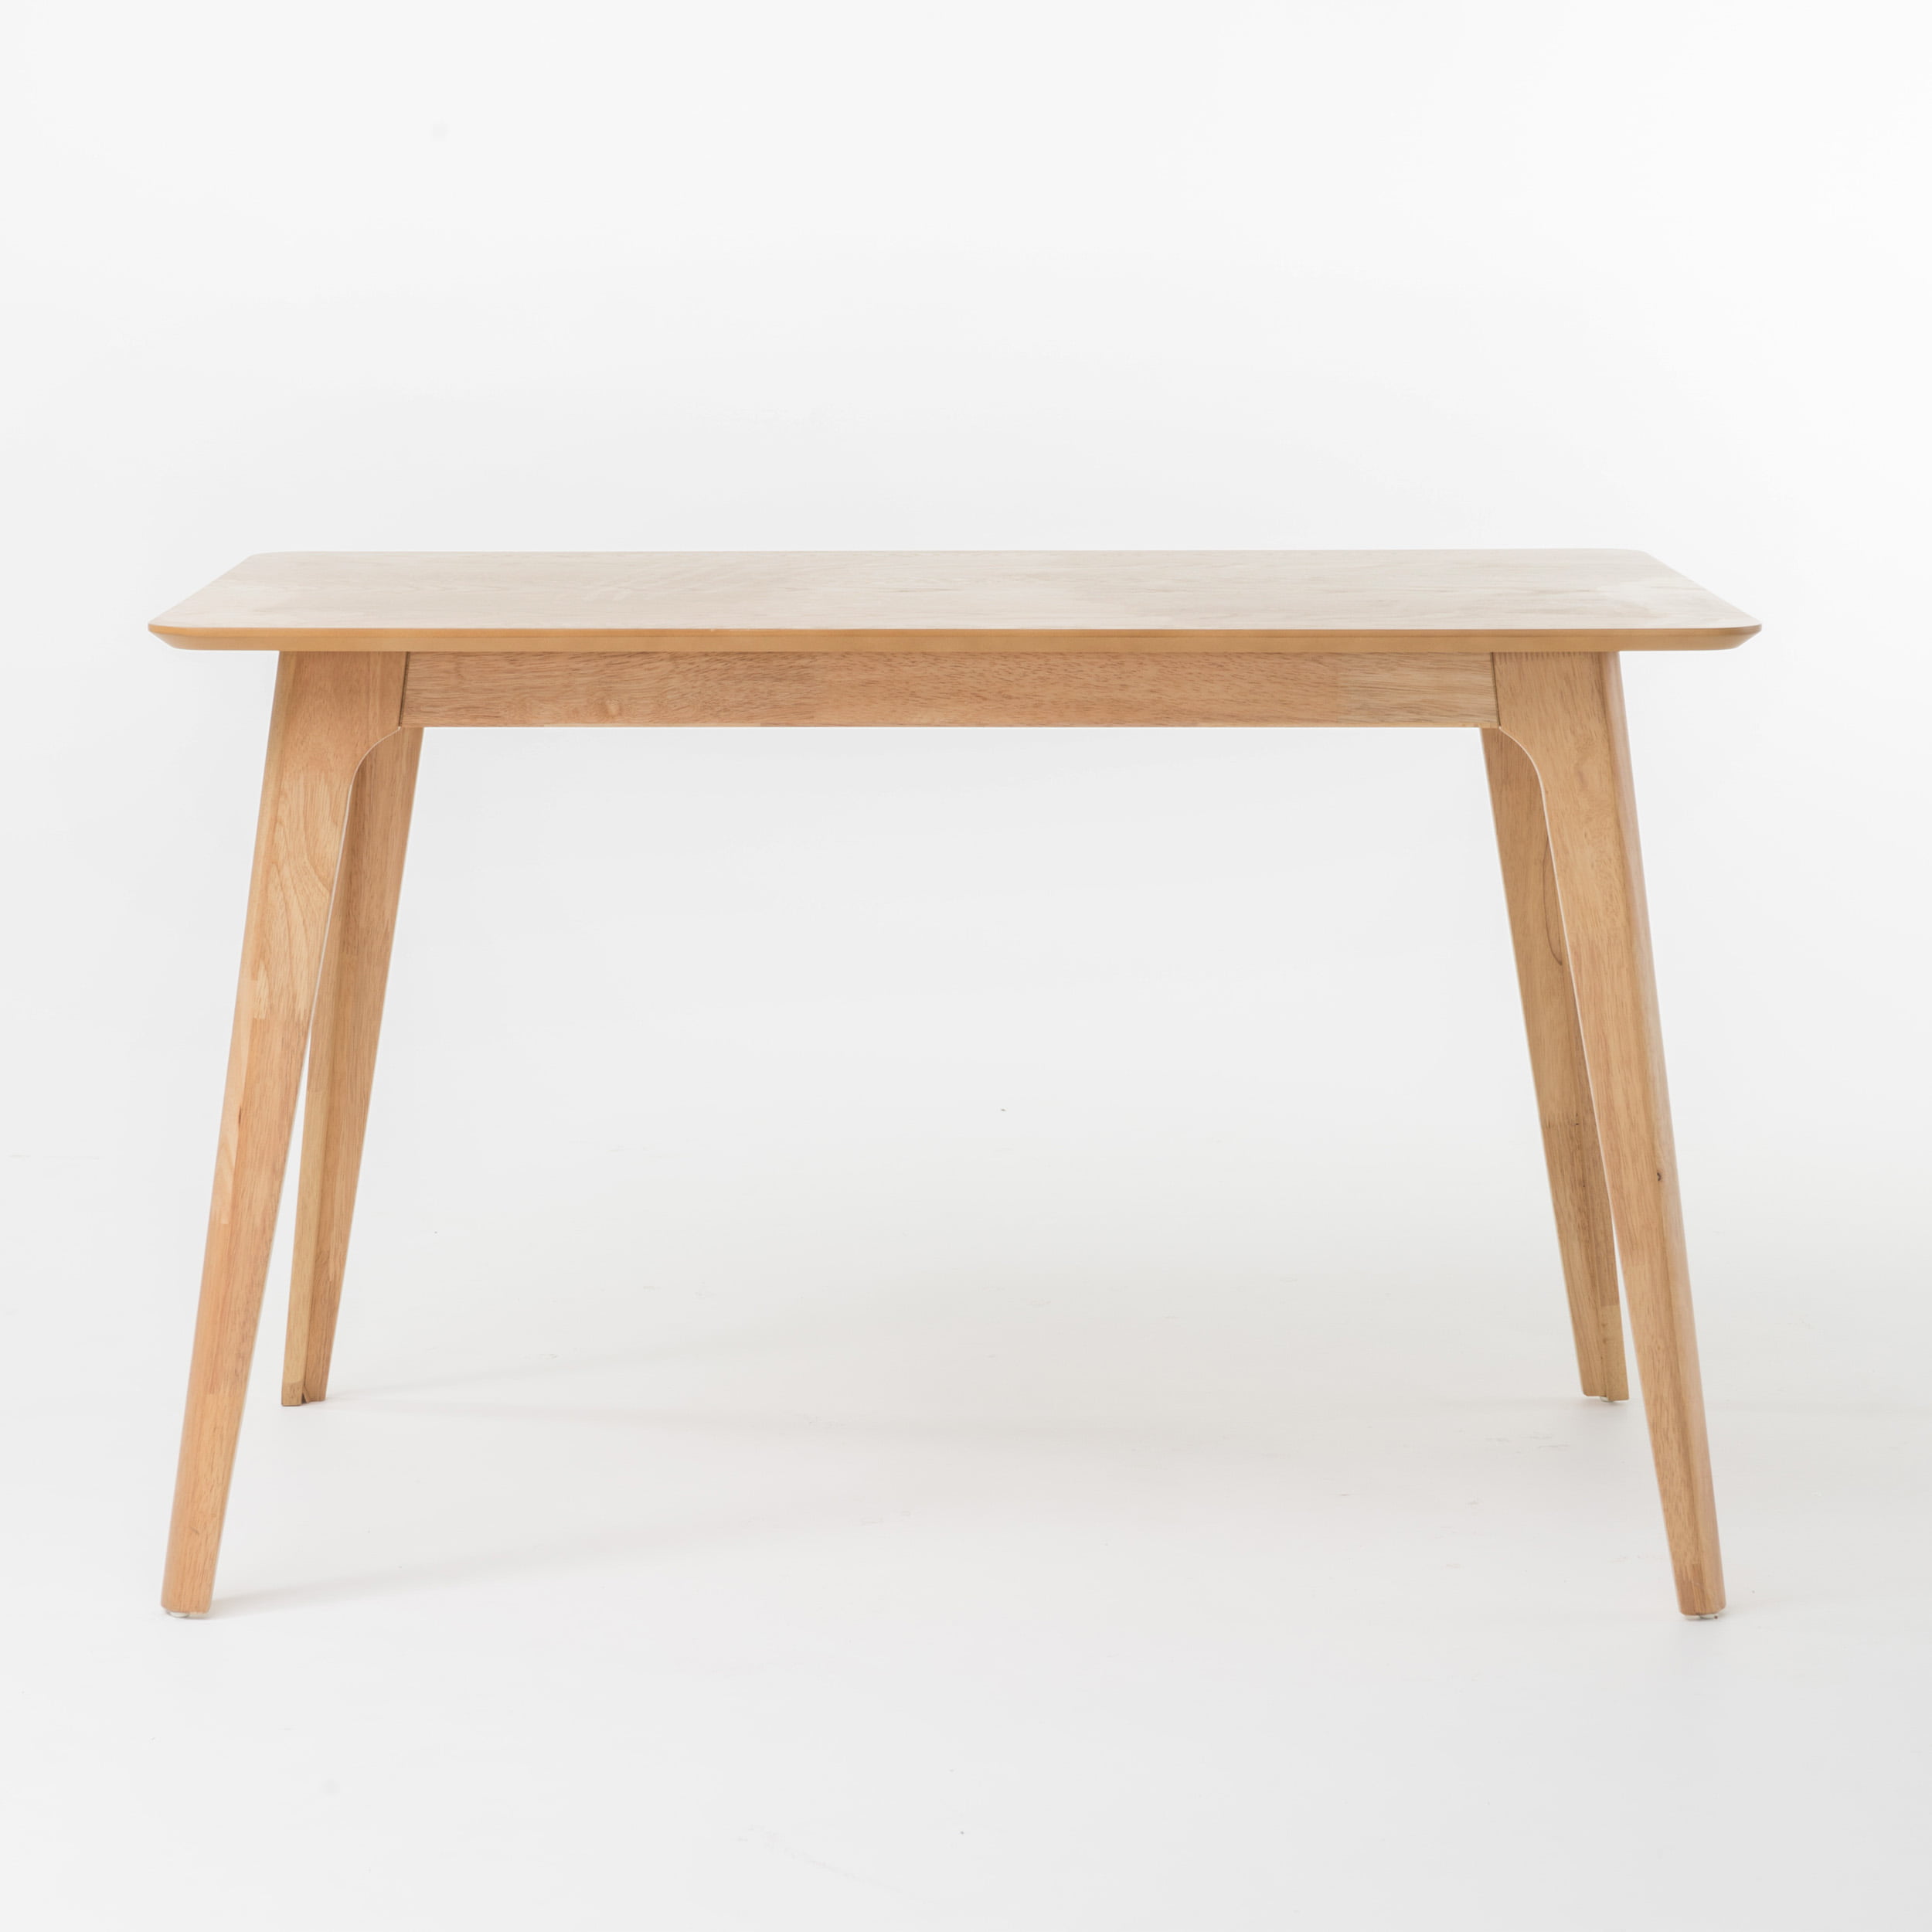 Details about   Elsinore Mid-Century Modern Natural Oak Finish Faux Wood Dining Table 